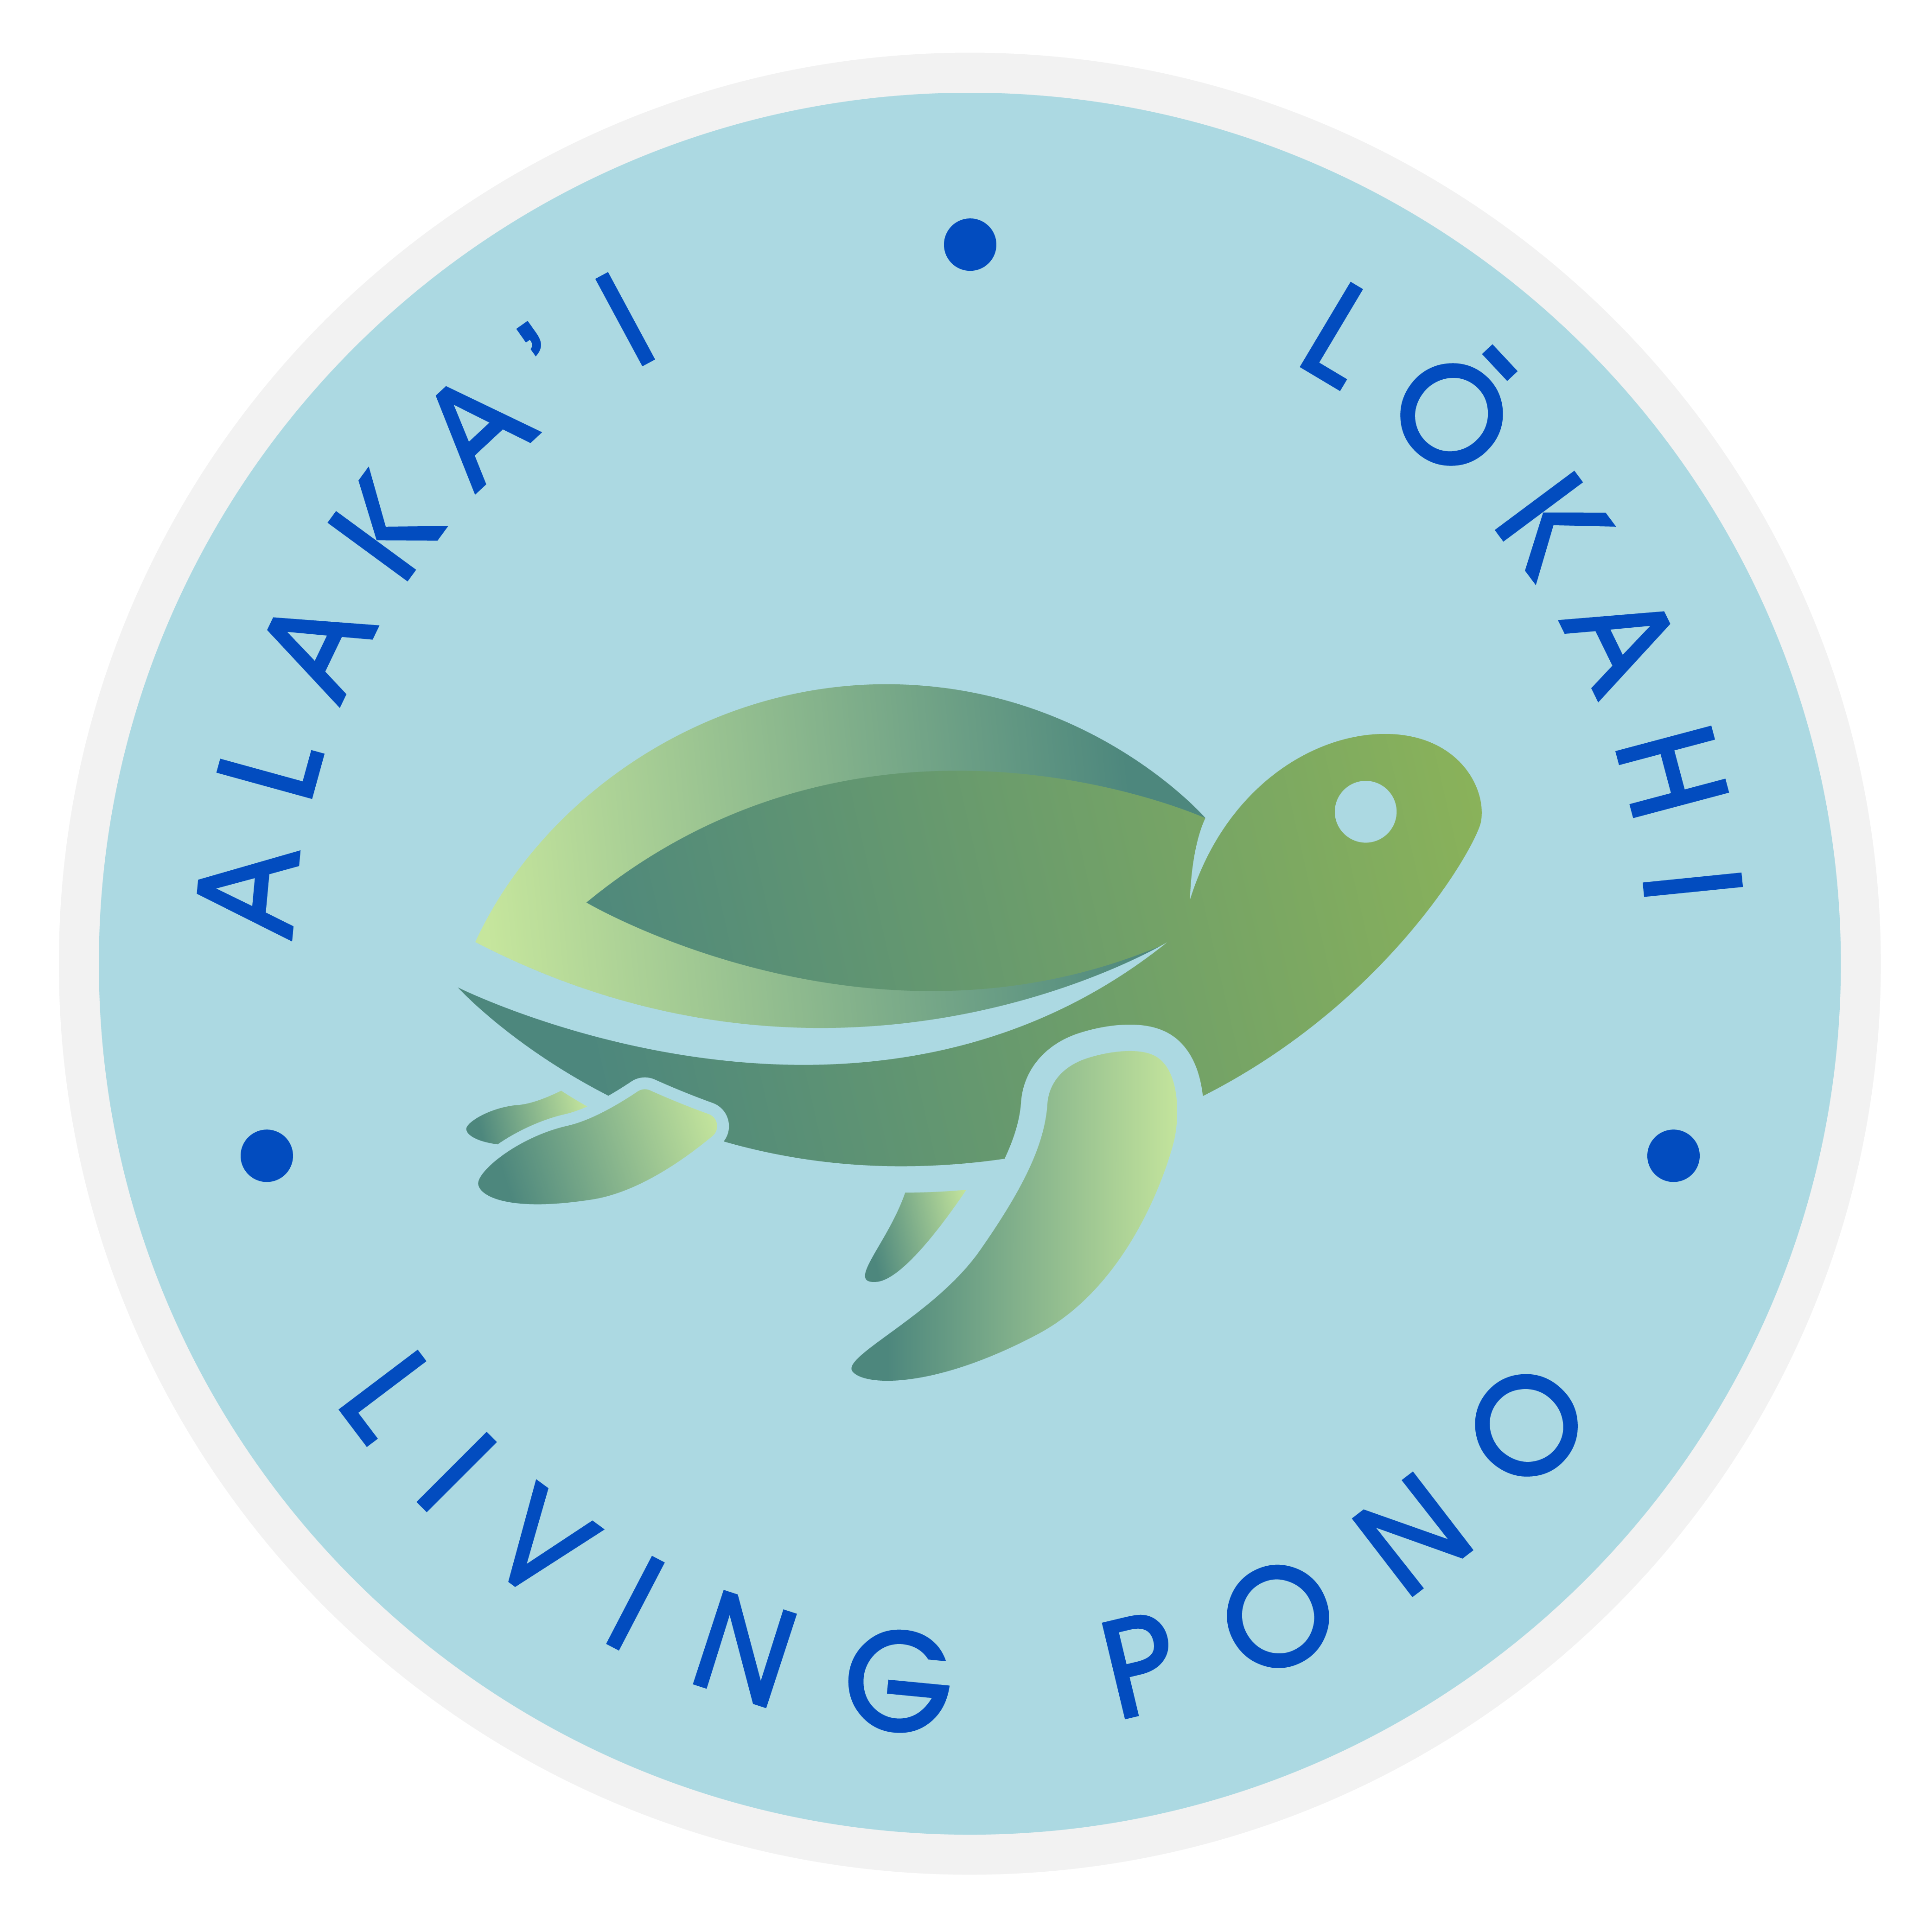 Living Pono: A Brand New Resource for Business Leaders